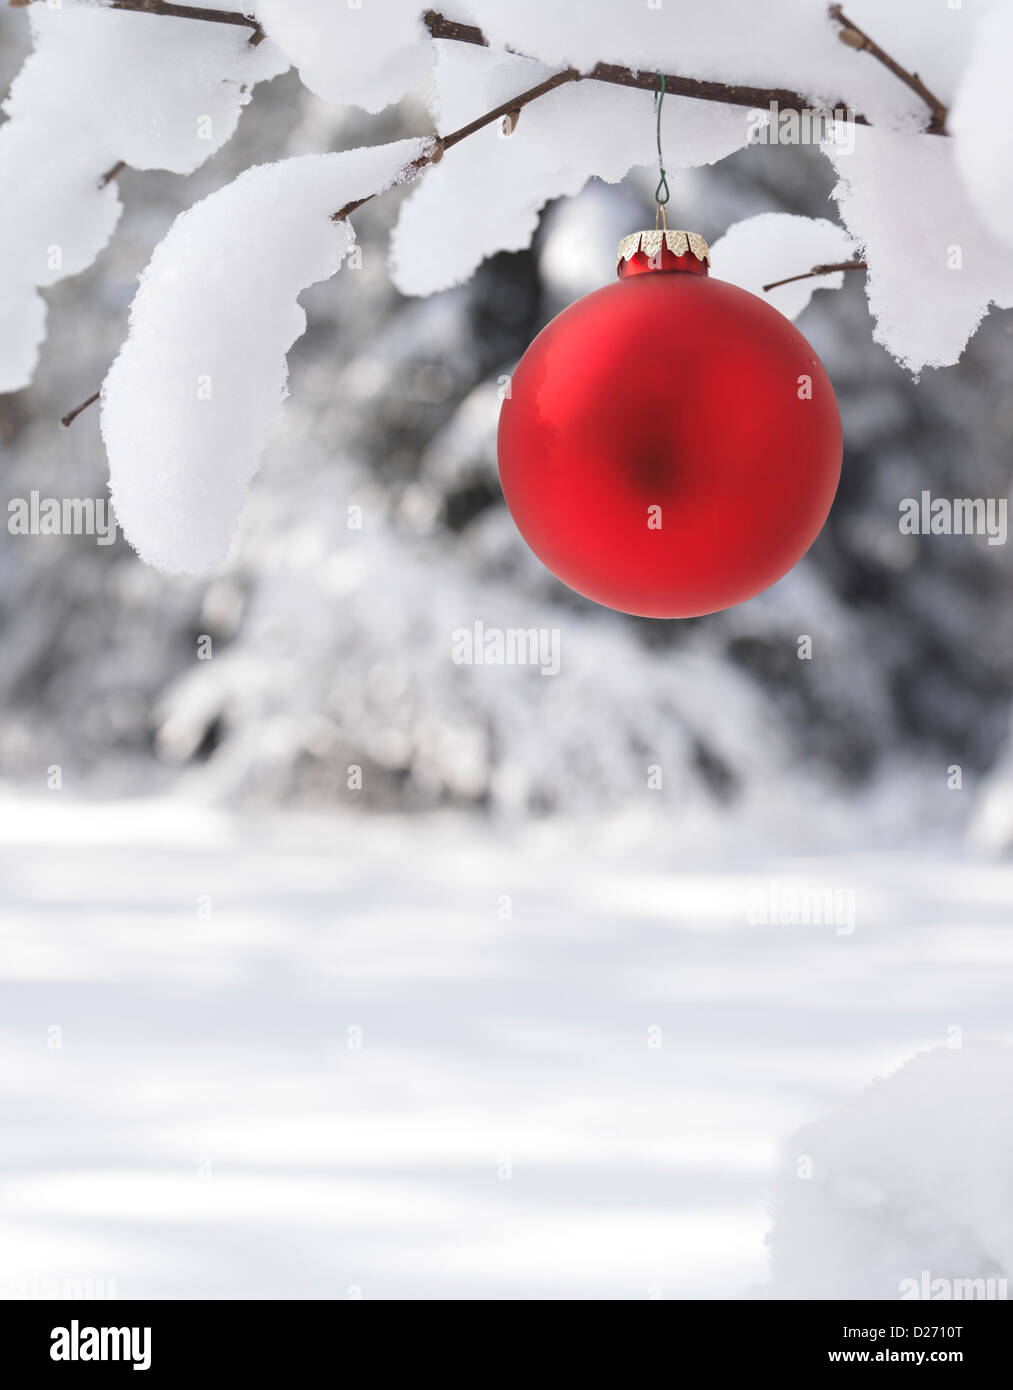 Red Christmas ornament outdoors on a snow covered tree branch winter nature scenic artistic holiday background